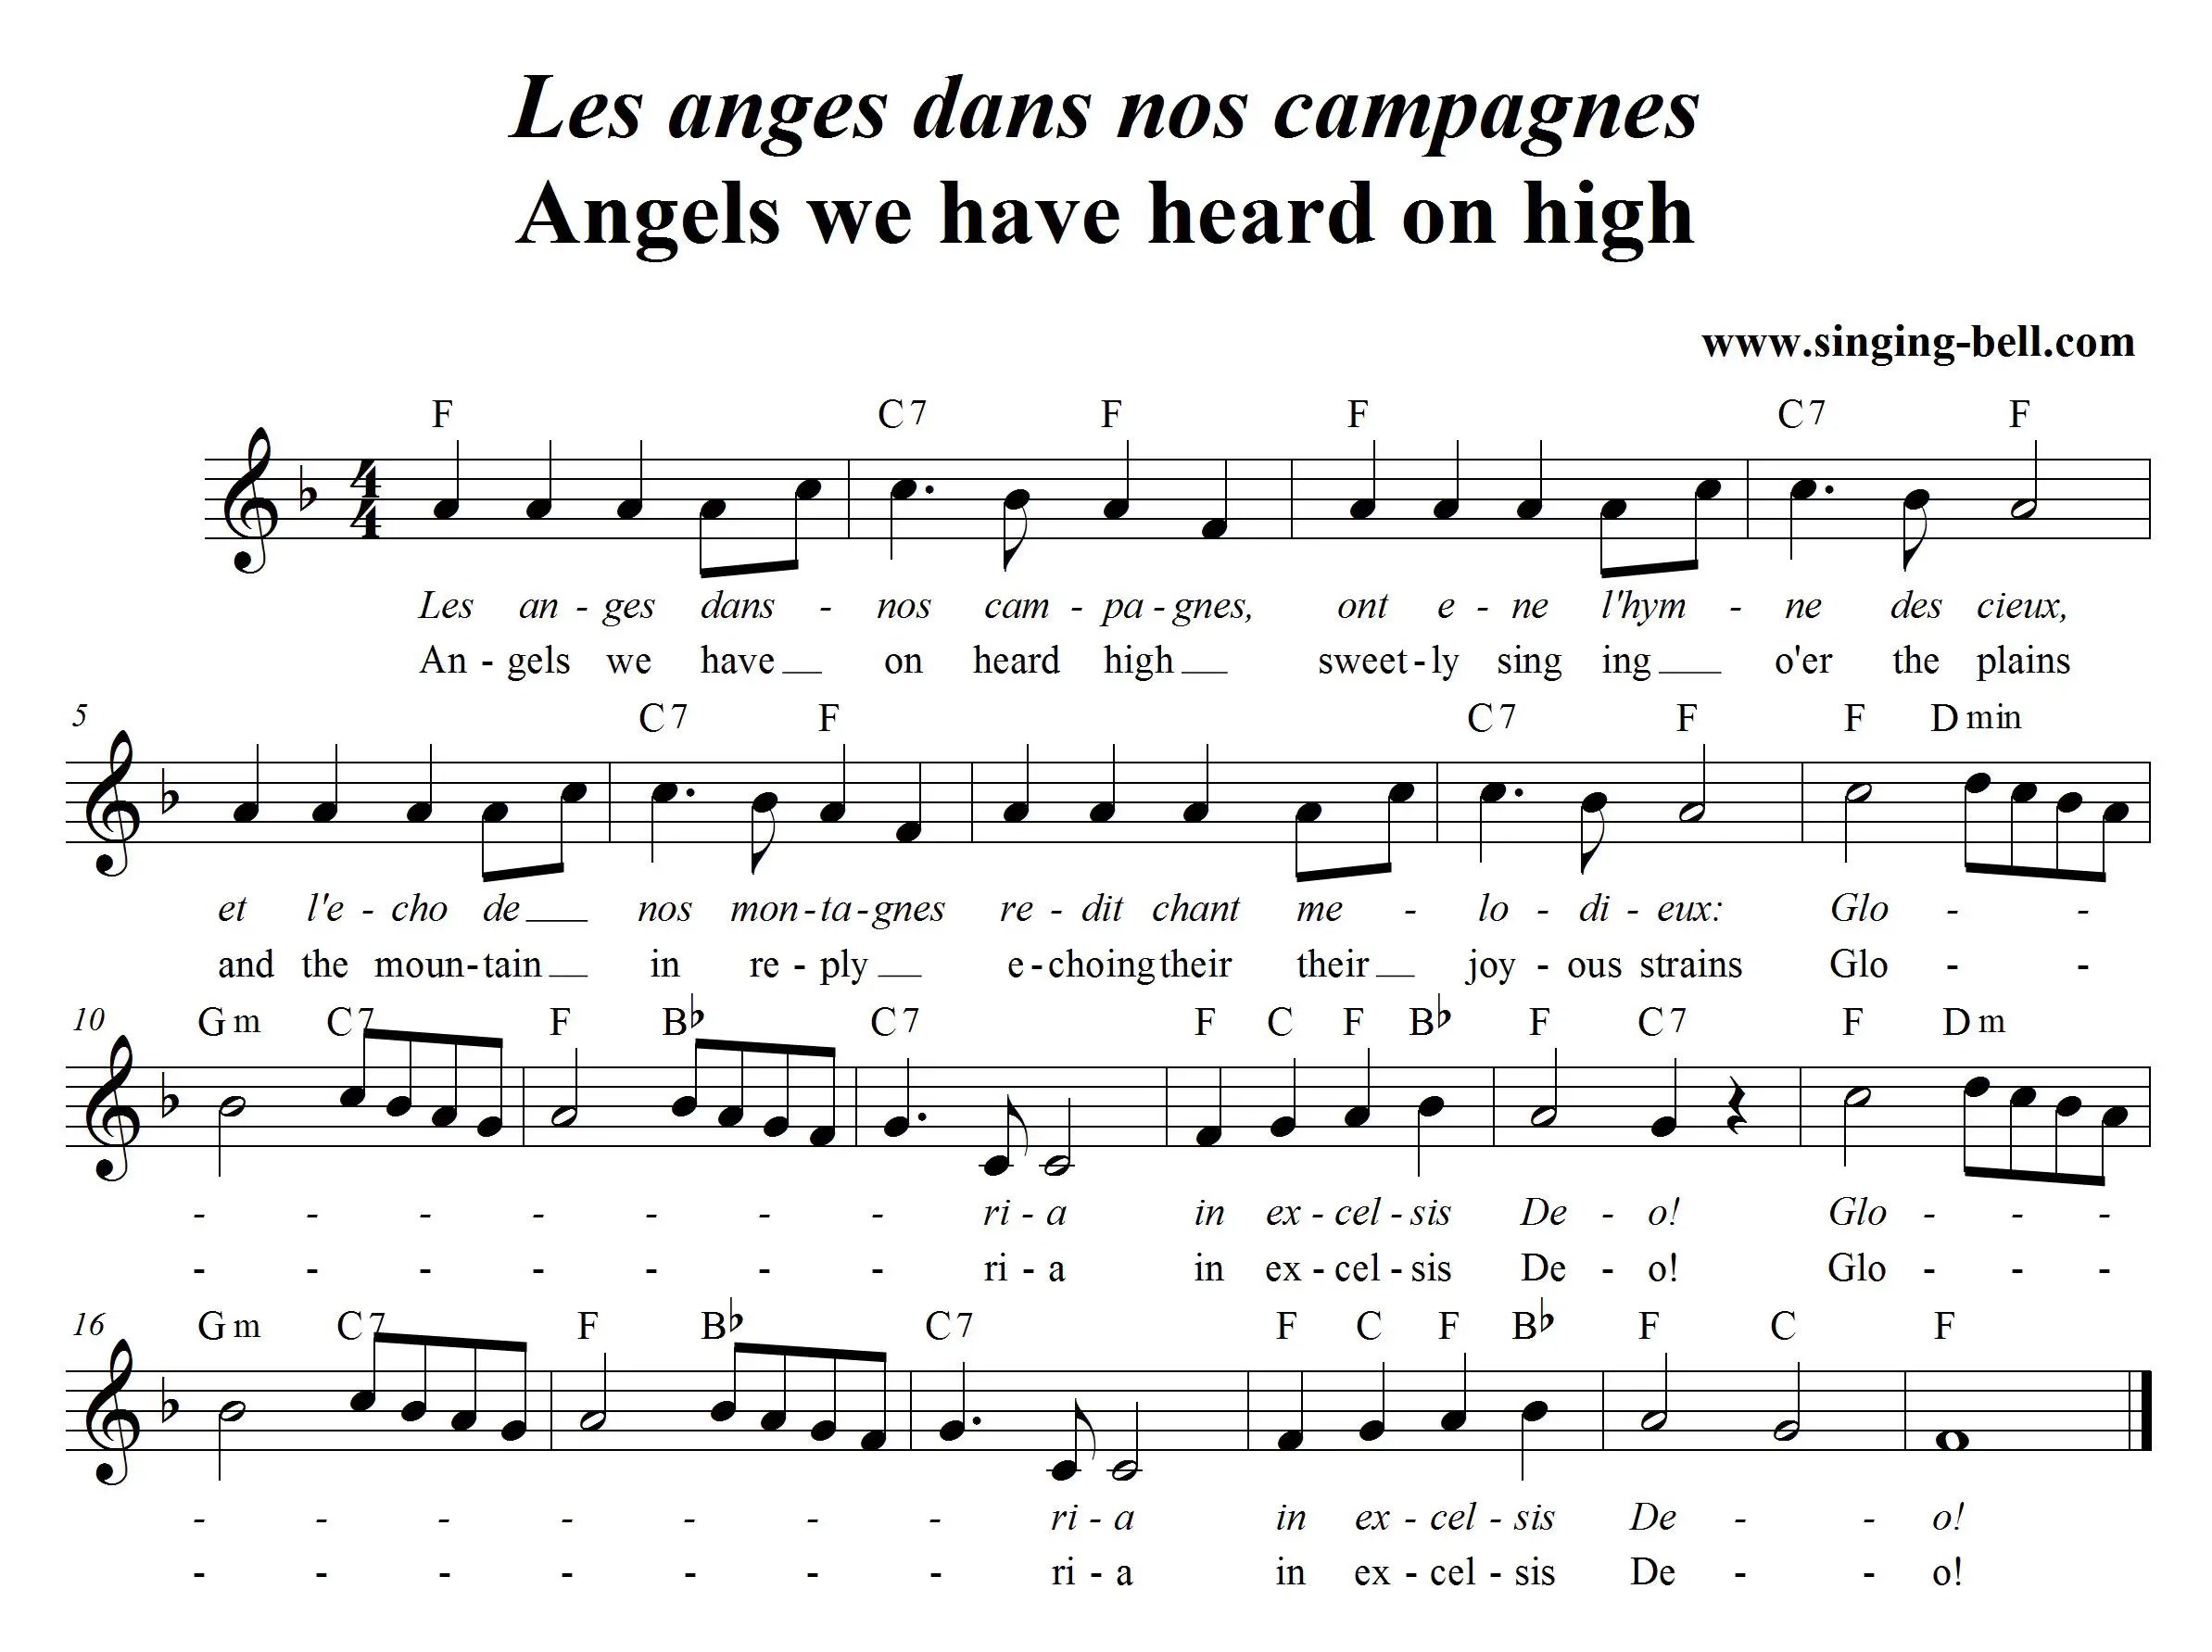 Angels we have heard on high (Les anges dans nos campagnes) score in F